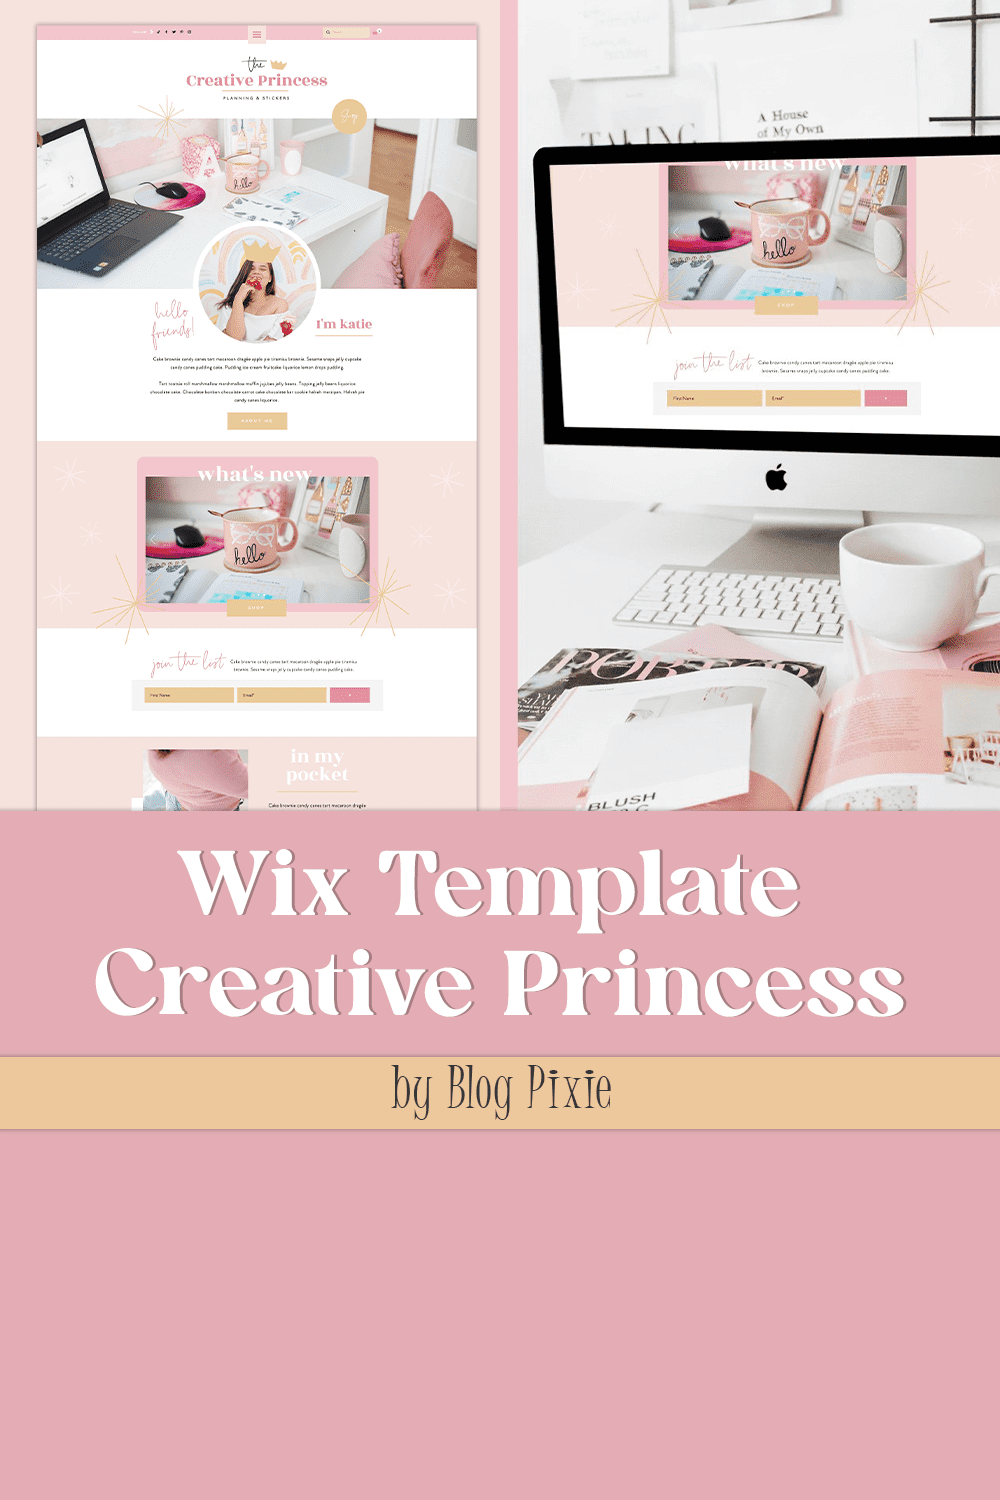 Wix Template Creative Princess - pinterest image preview.